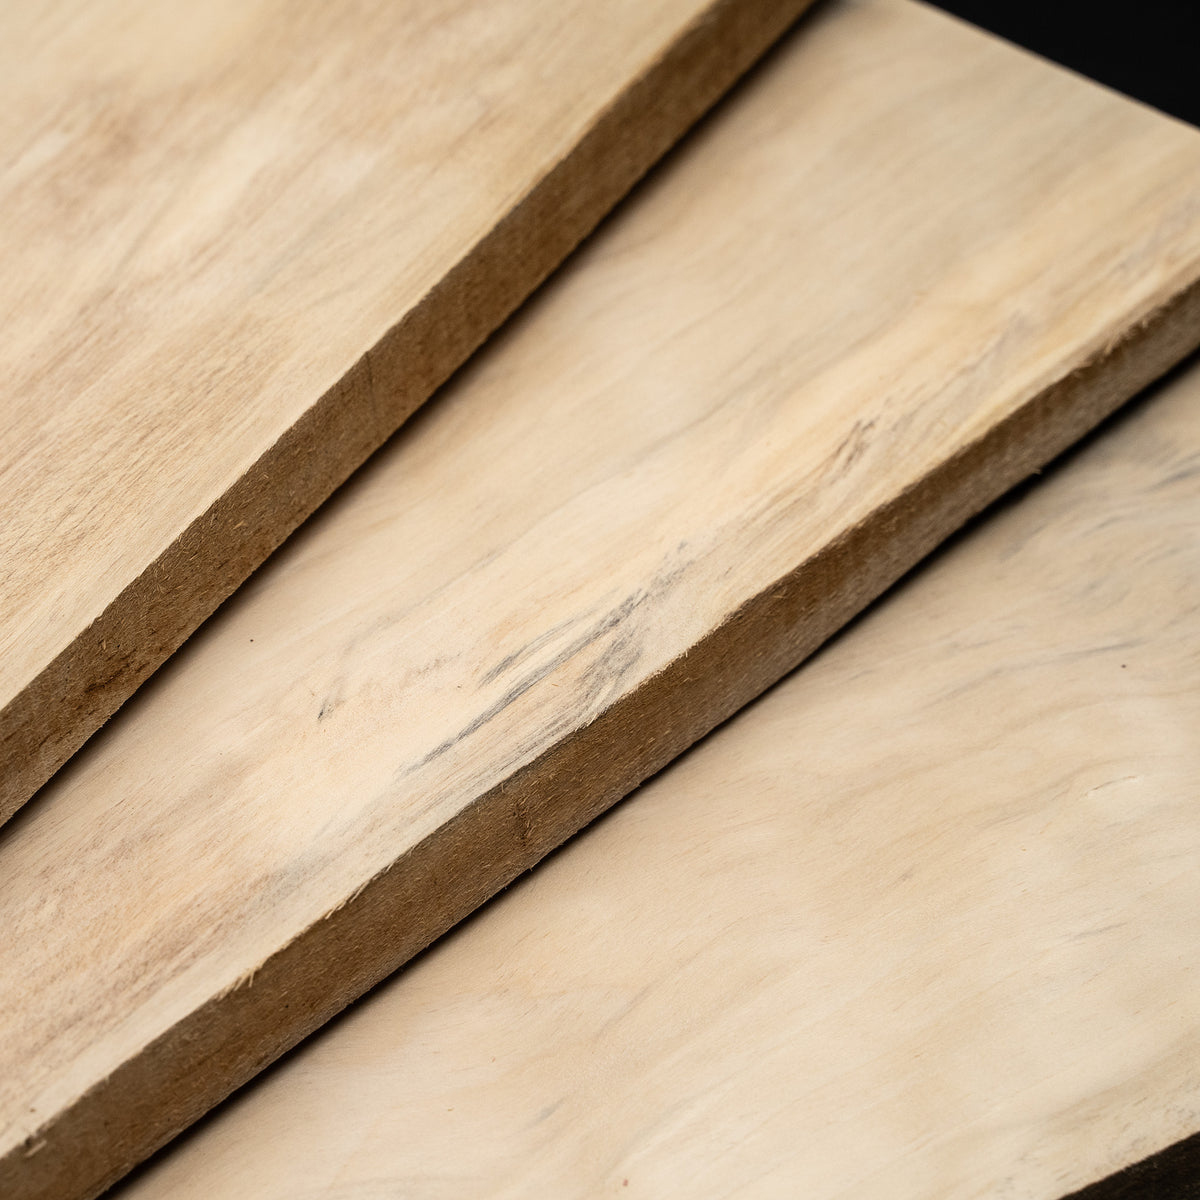 4/4 1” Soft Red Maple Boards - Kiln Dried Dimensional Lumber - Cut to Size Soft Maple Board